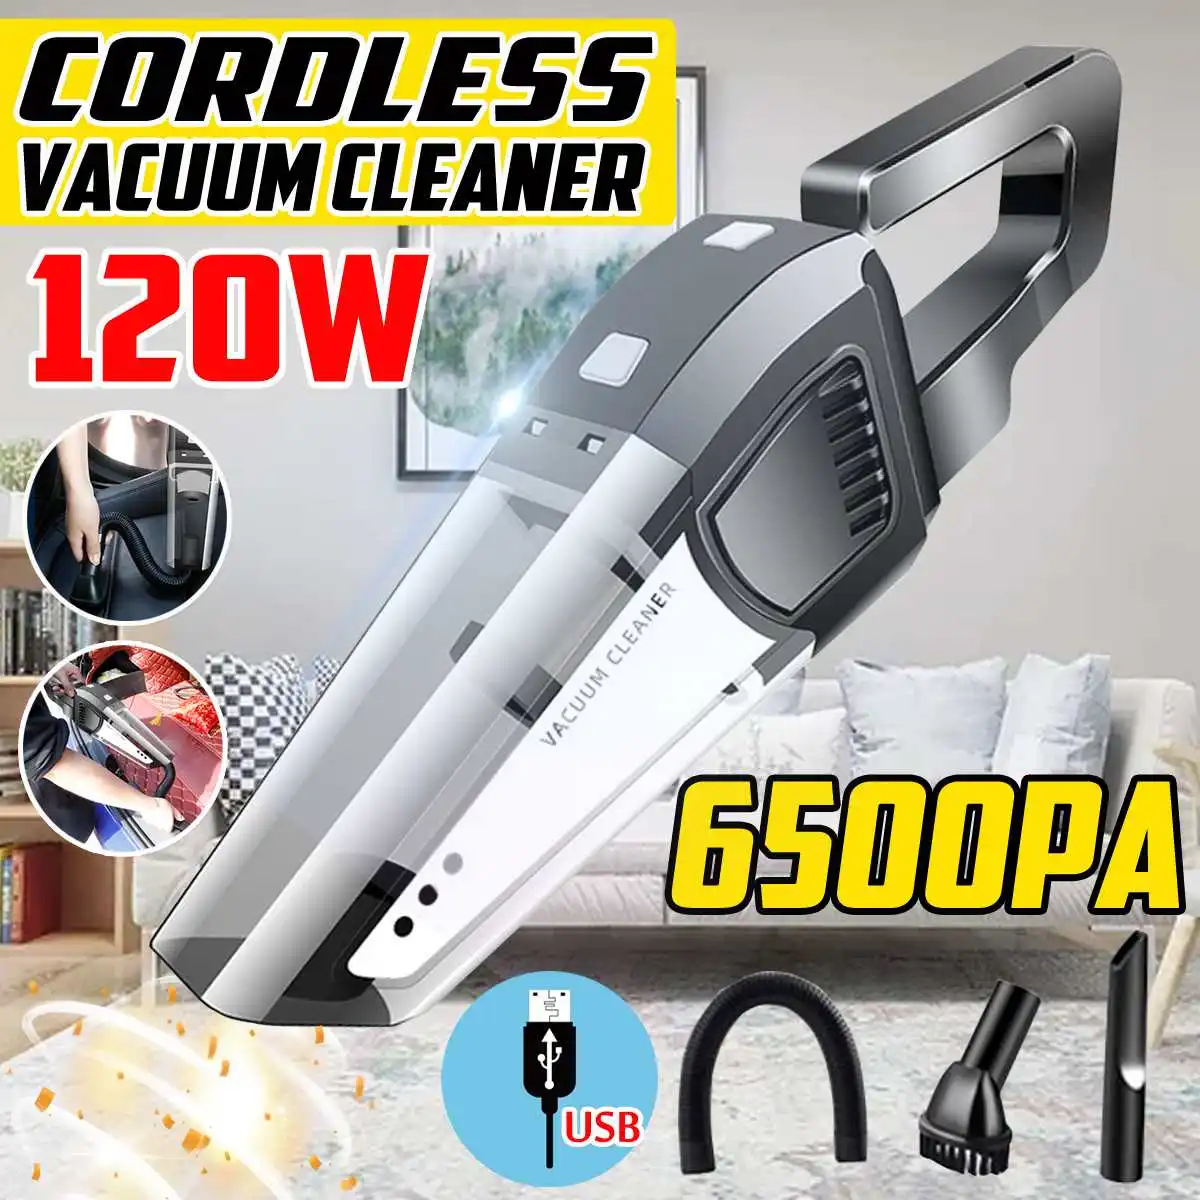 

120W Cordless Car Vacuum Cleaner DC 12V Wet and Dry Dual Use Auto Portable Vacuums Cleaner For home Office 6500pa Strong Power